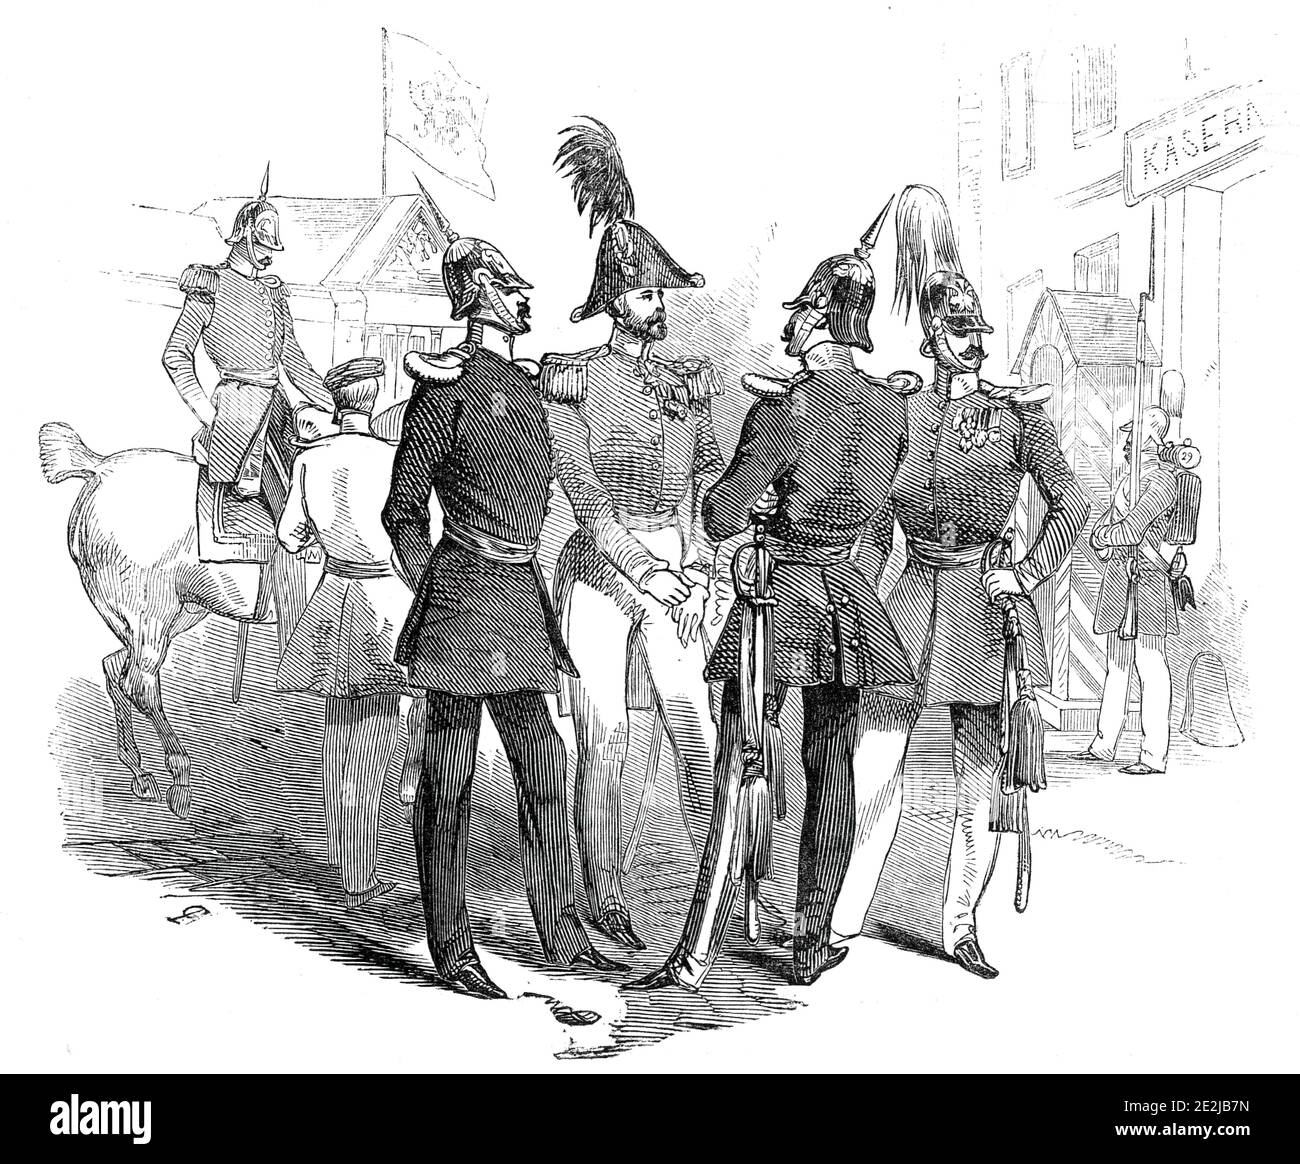 Prussian officers - Place d'Armes, Cologne, 1845. Soldiers in uniform: '...a group of Prussian officers, their Kasern (barrack), &amp;c'. From &quot;Illustrated London News&quot;, 1845, Vol VII. Stock Photo